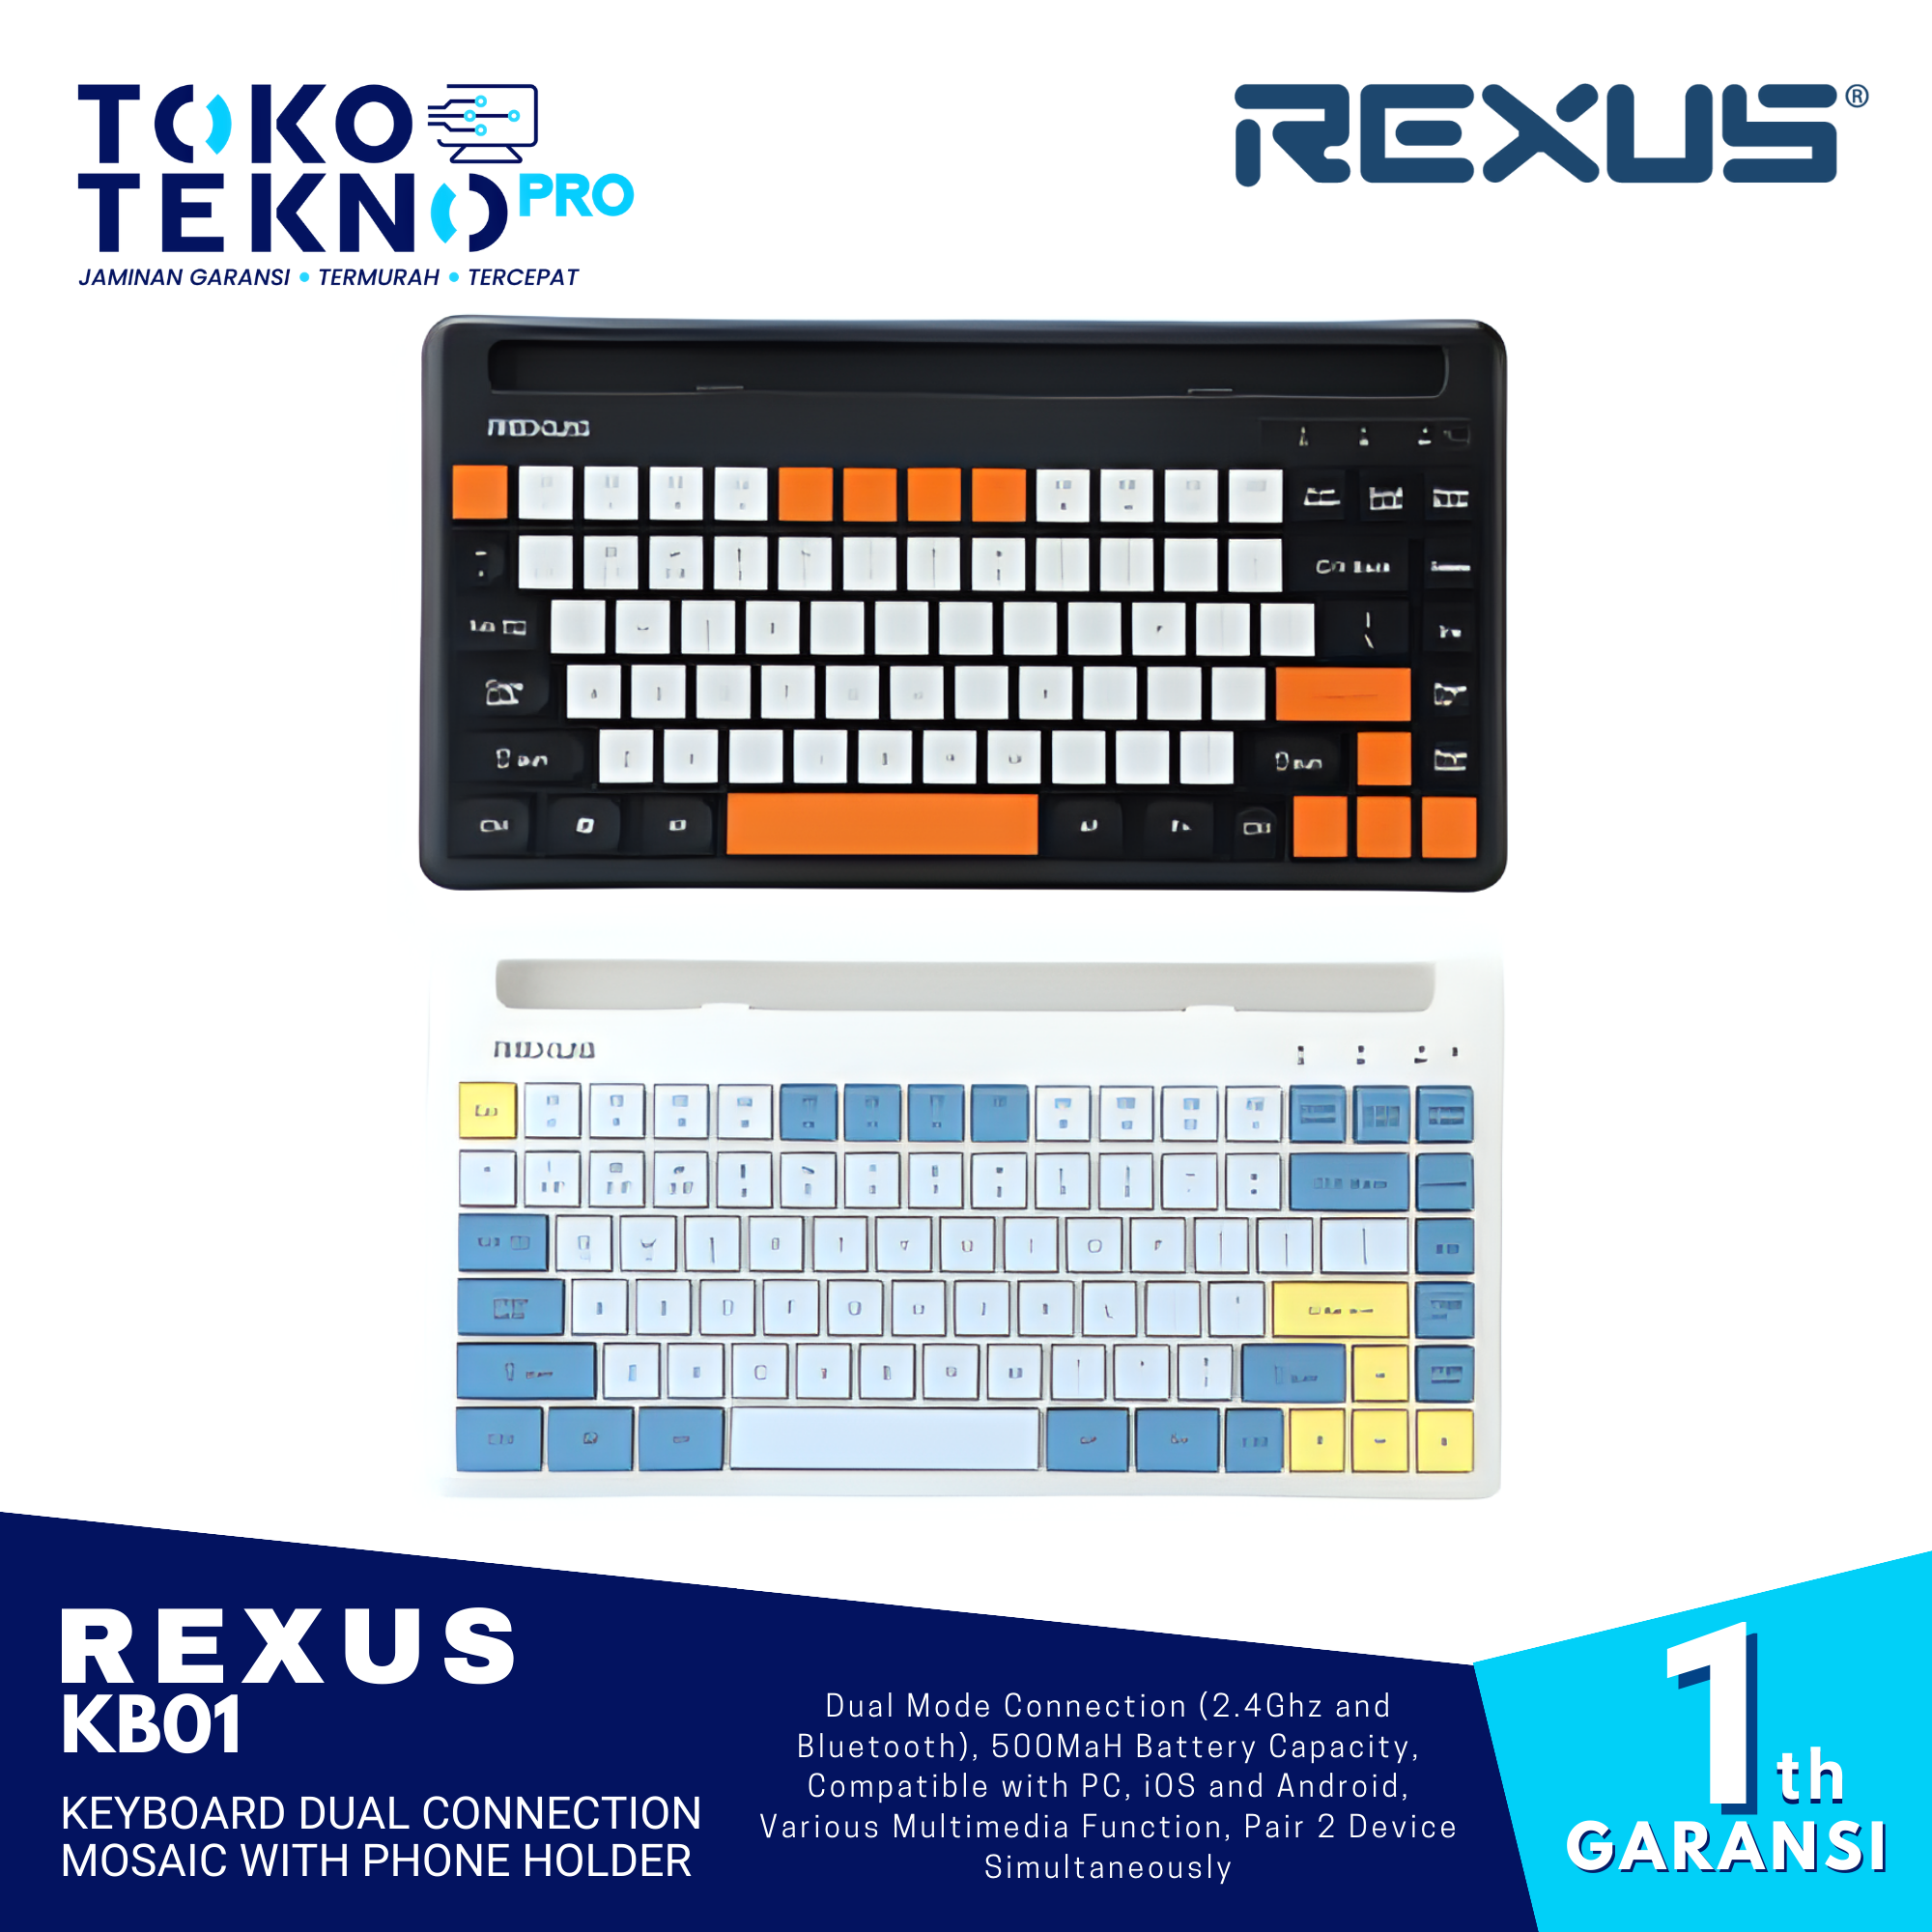 Rexus KB01 Keyboard Dual Connection Mosaic With Phone Holder